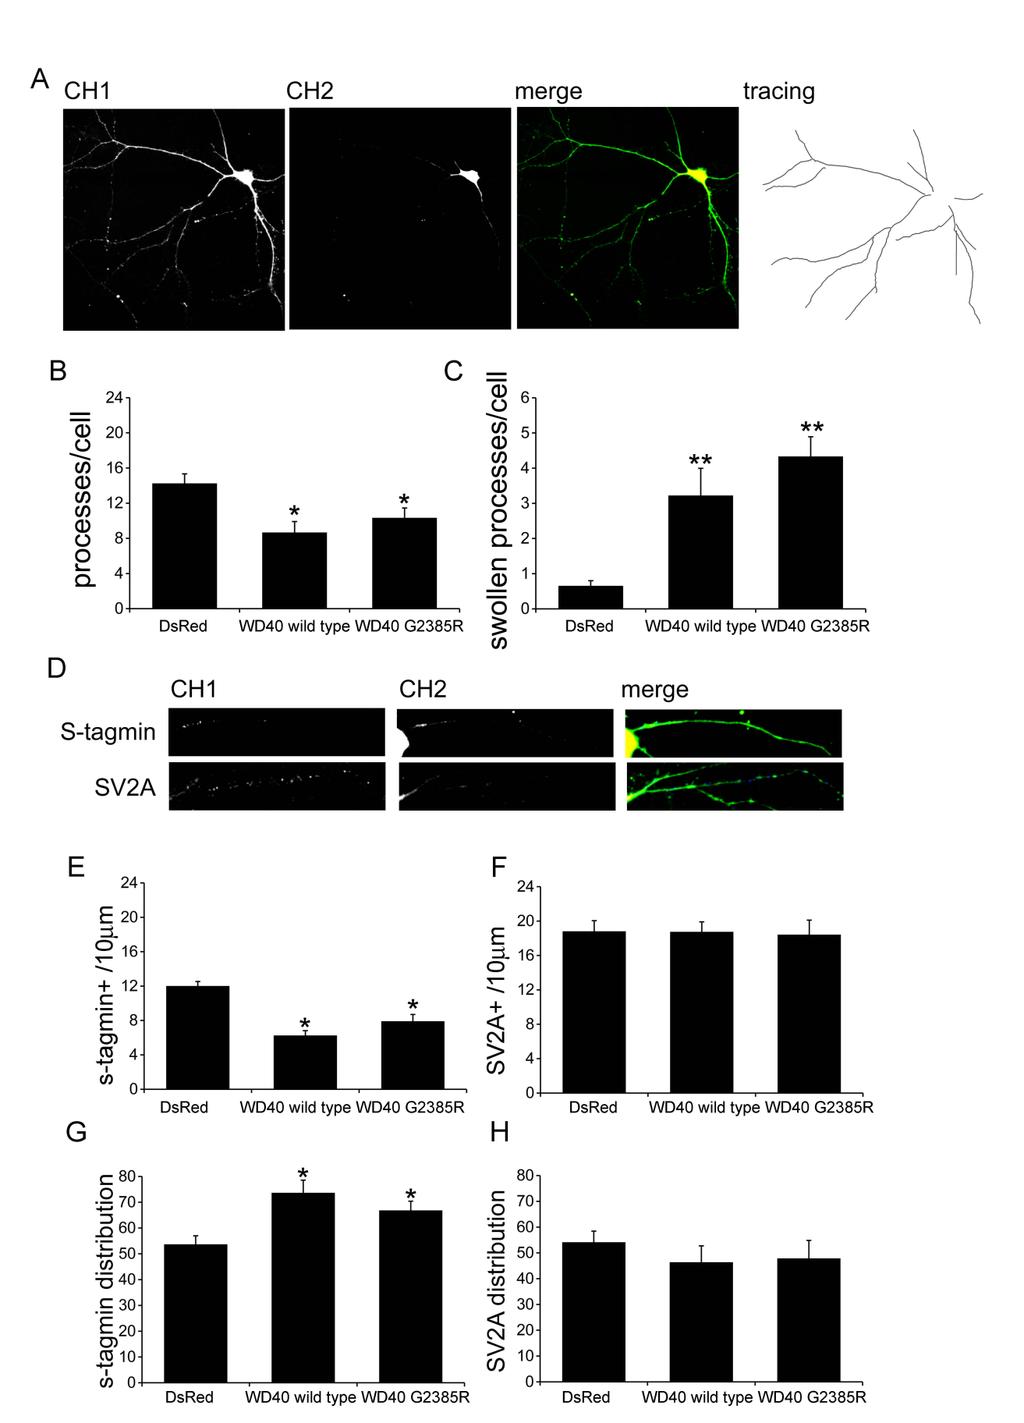 Figure S6. Expression of the LRRK2 WD40 G2385R domain is sufficient to induce neurotoxicity.